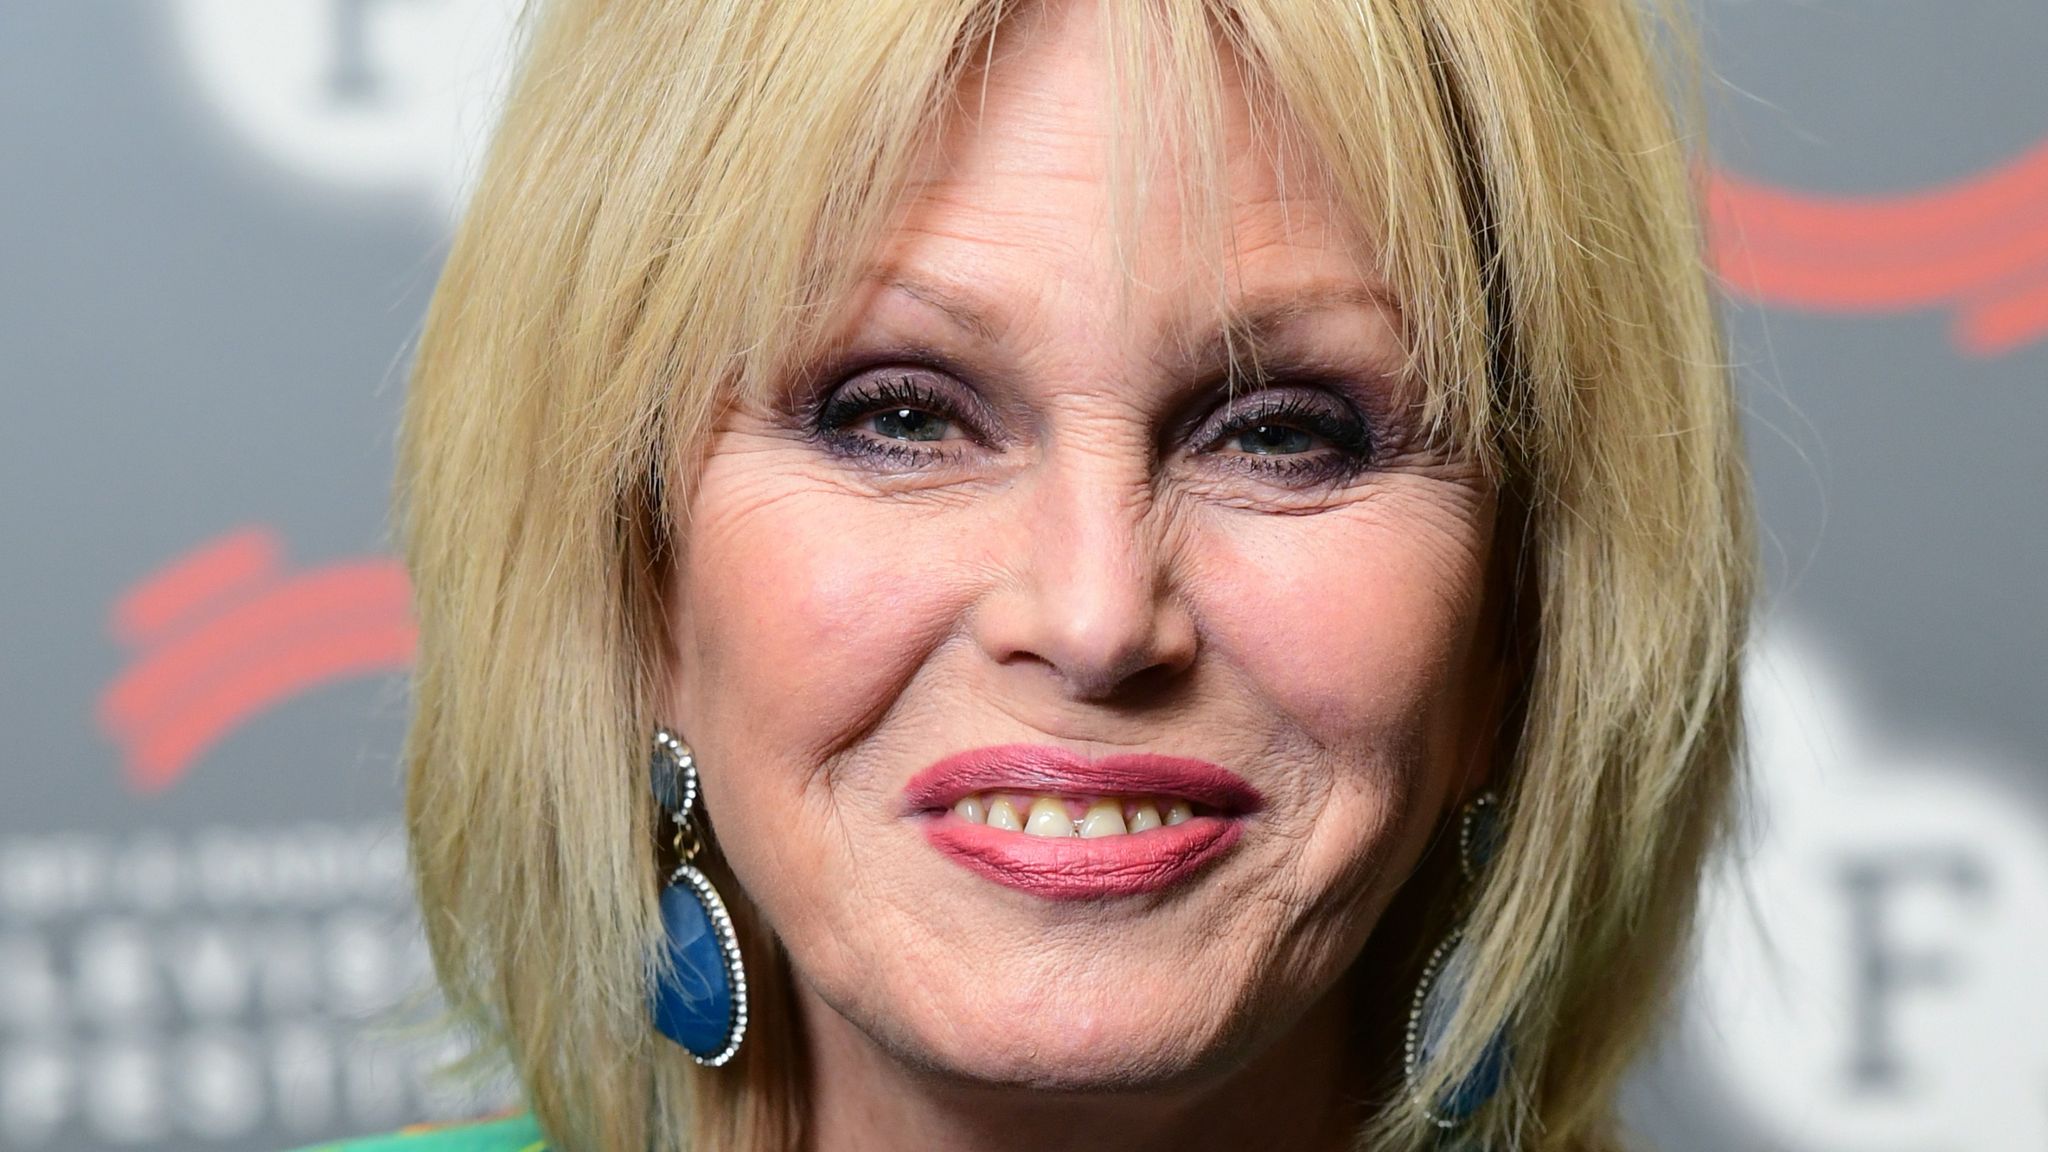 Joanna Lumley said she is &#39;astonished, thrilled and touched beyond words&#39; after being recognised